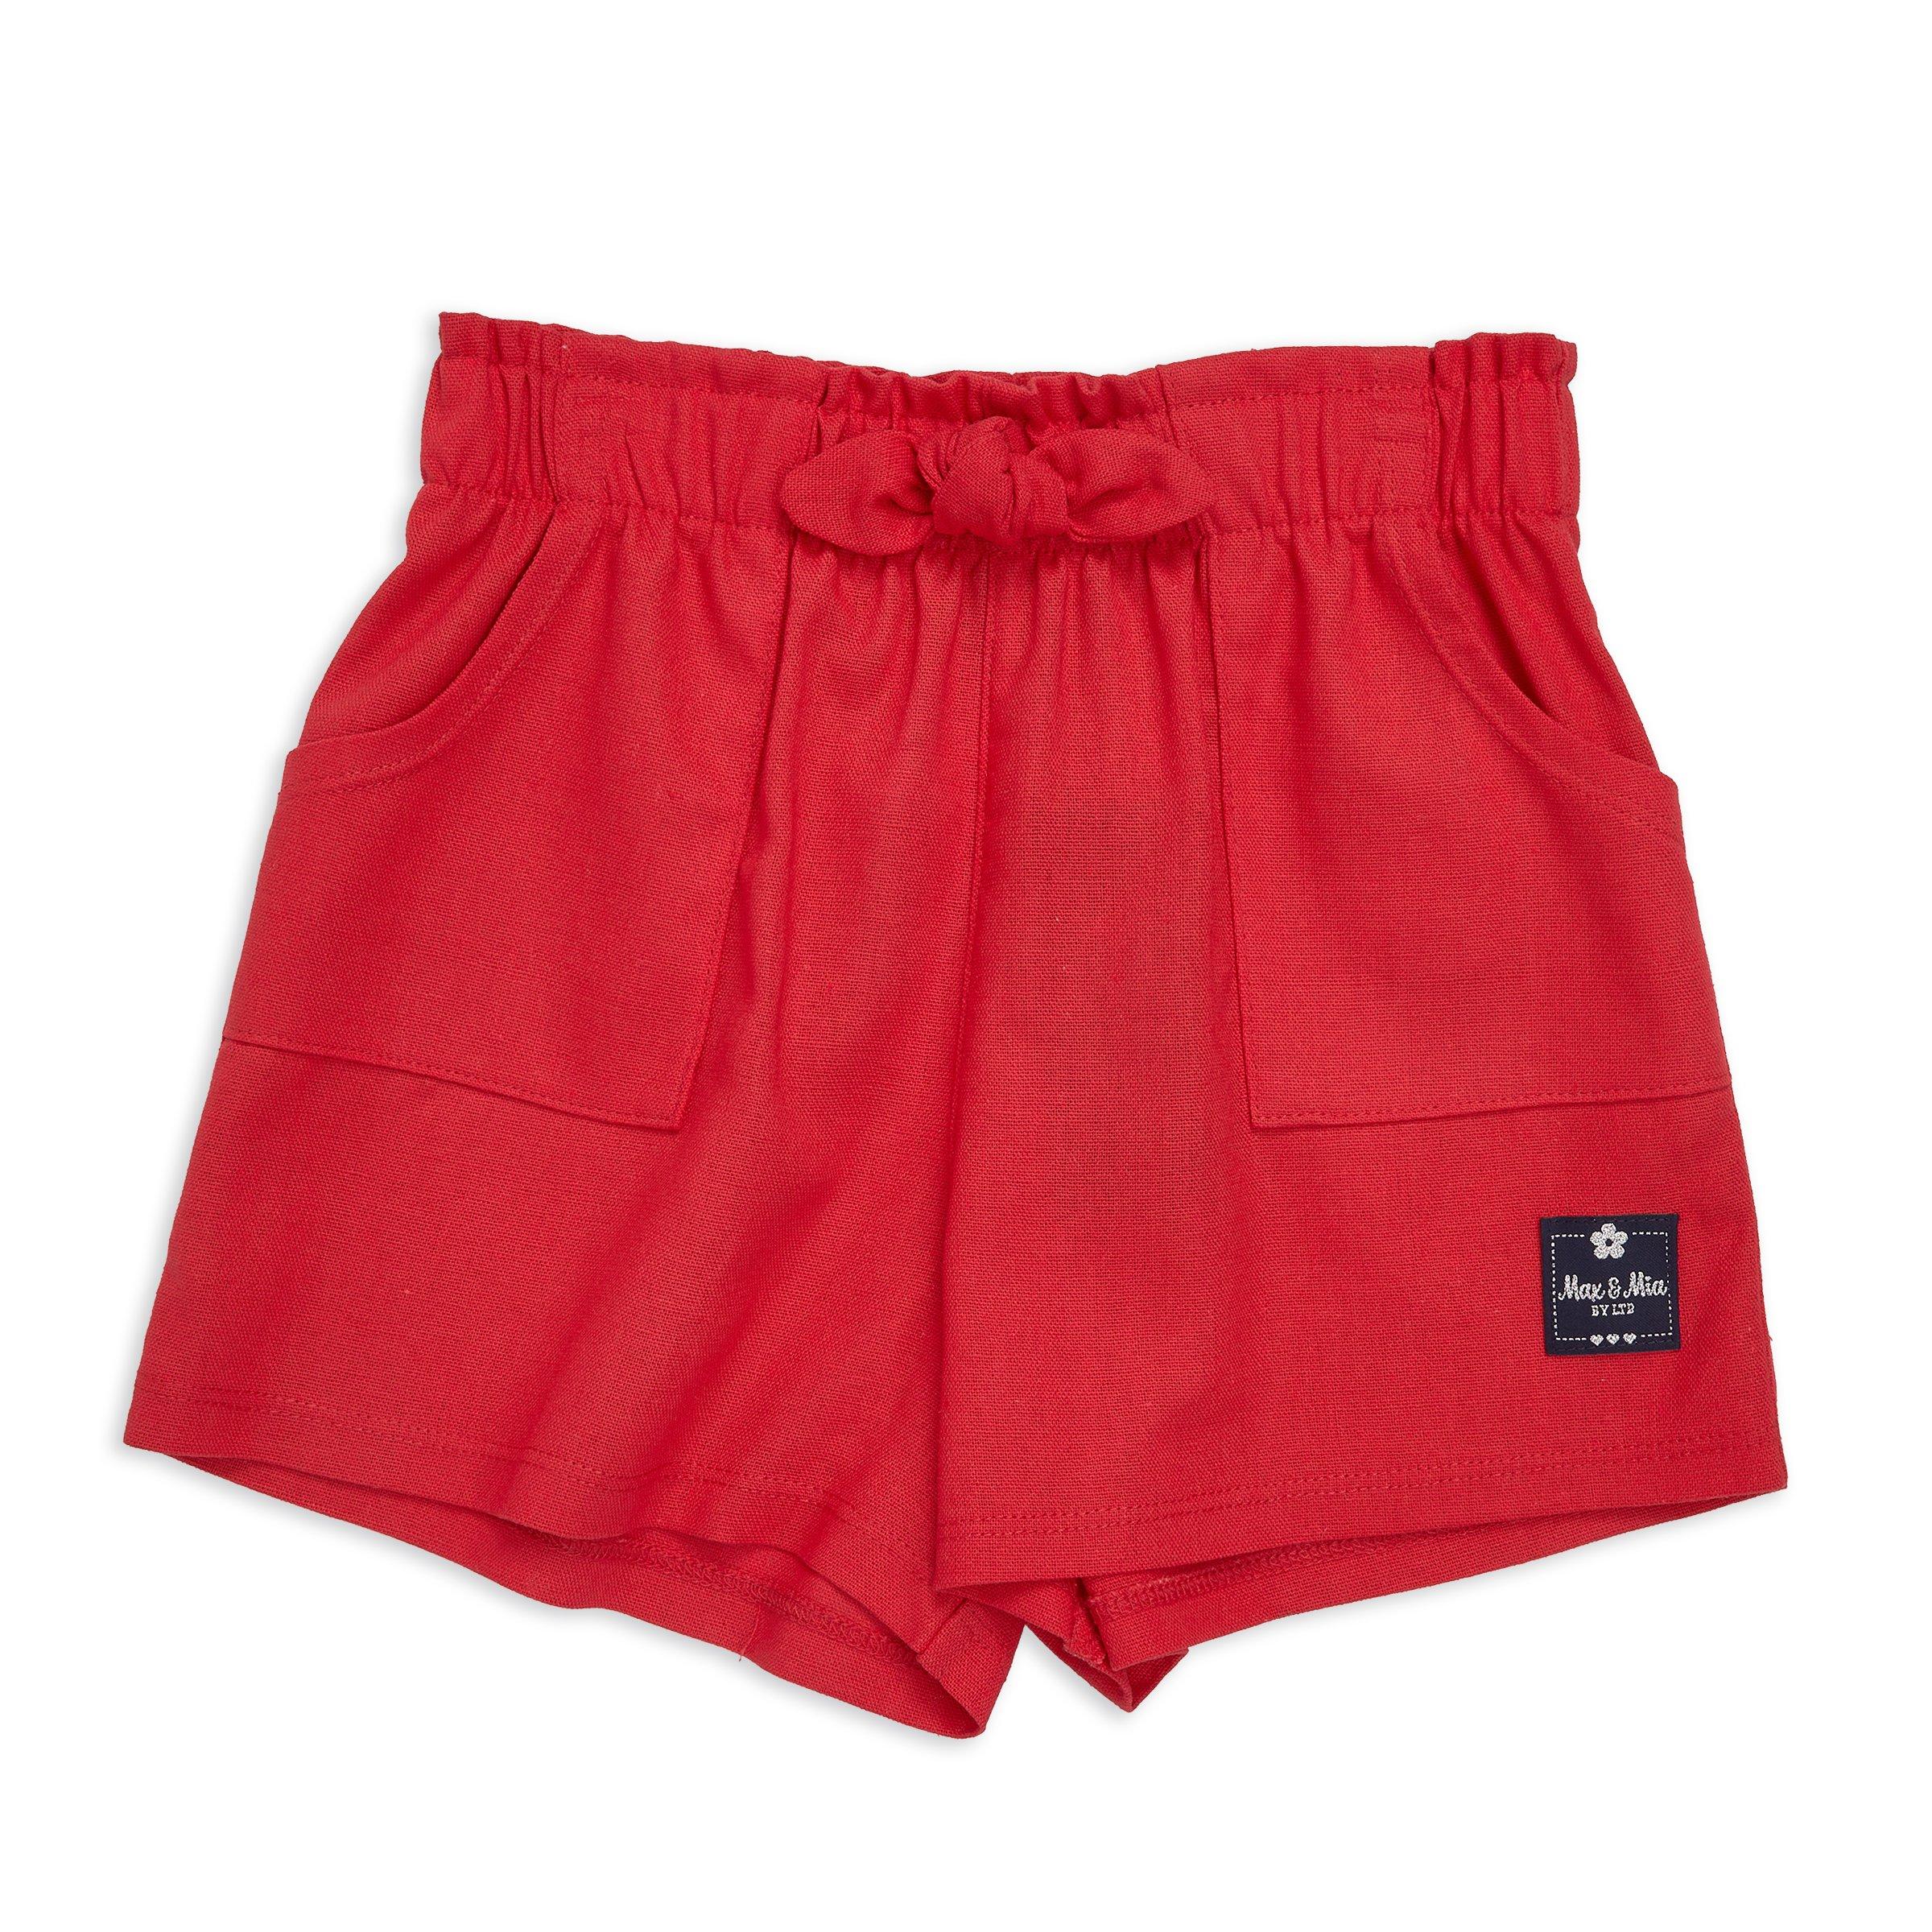 Kid Girl Red Shorts (3117124)